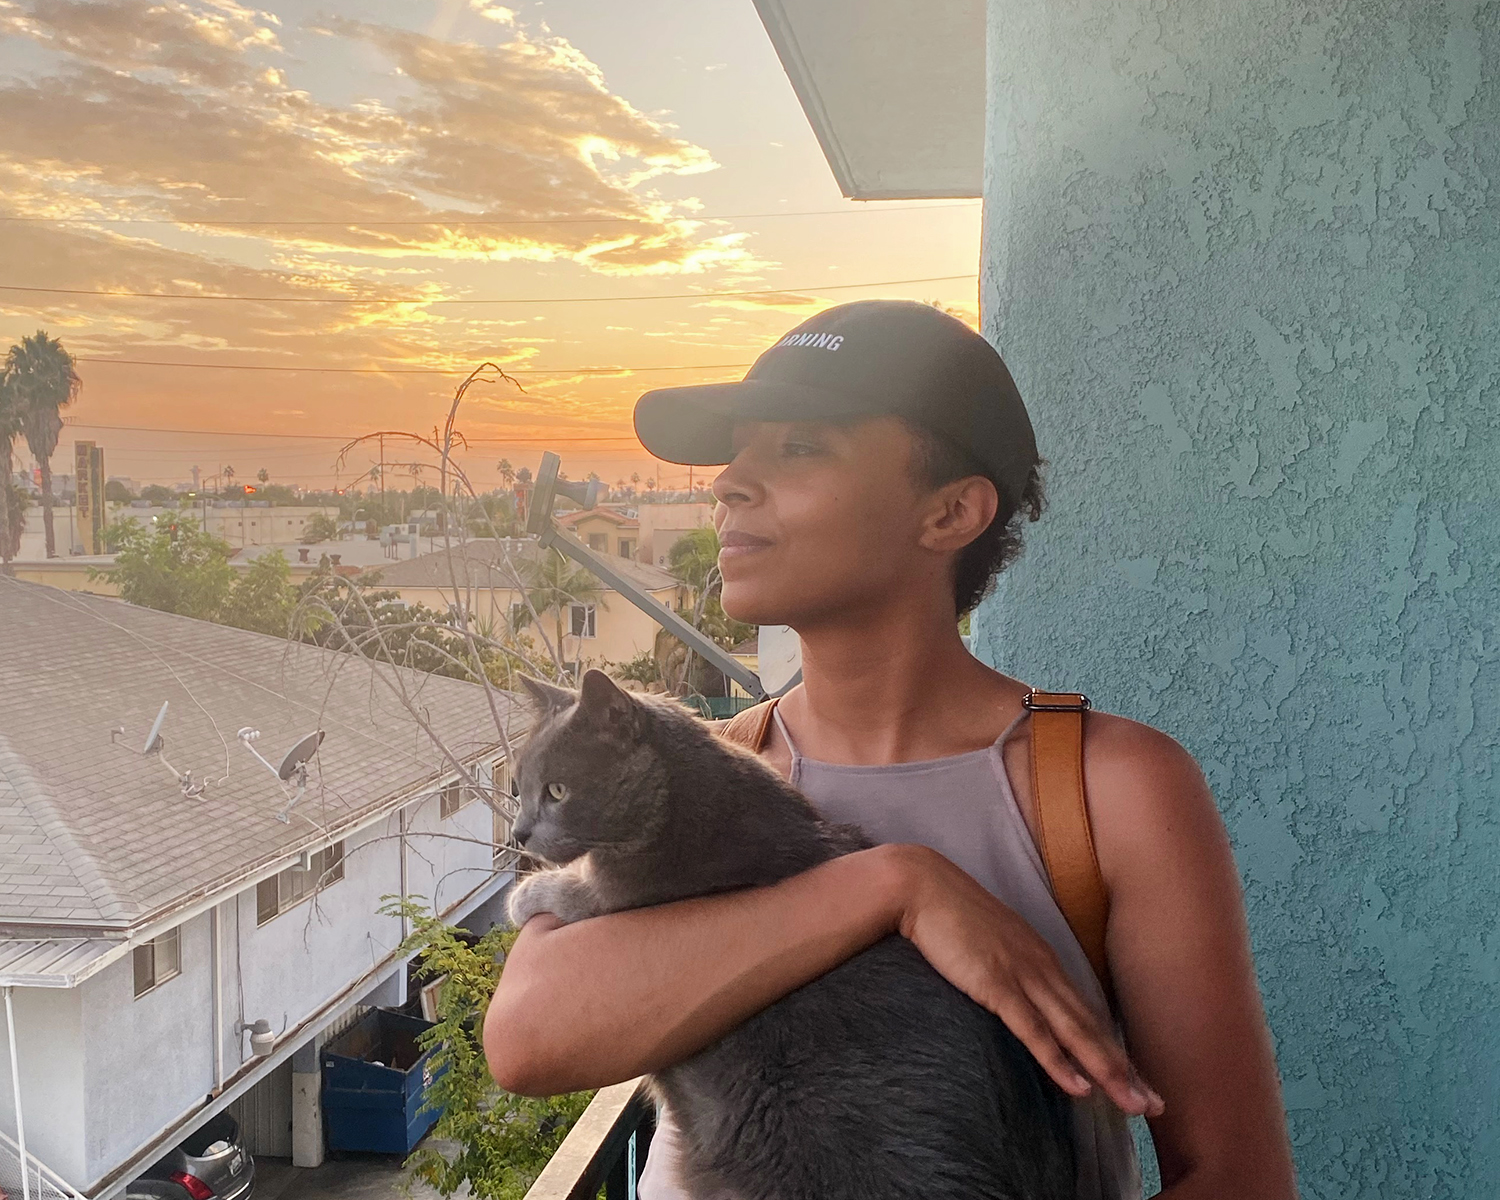 Image: A portrait of Kiki holding their cat Momi in their arms, shown from the waist up. Kiki and Momi are looking away from the camera and gazing out toward the cityscape. They are observing the view from a balcony at home. The sun sets behind them casting warm colors of orange, pink and purples into the sky among the clouds. Photo by Matthew Austin.